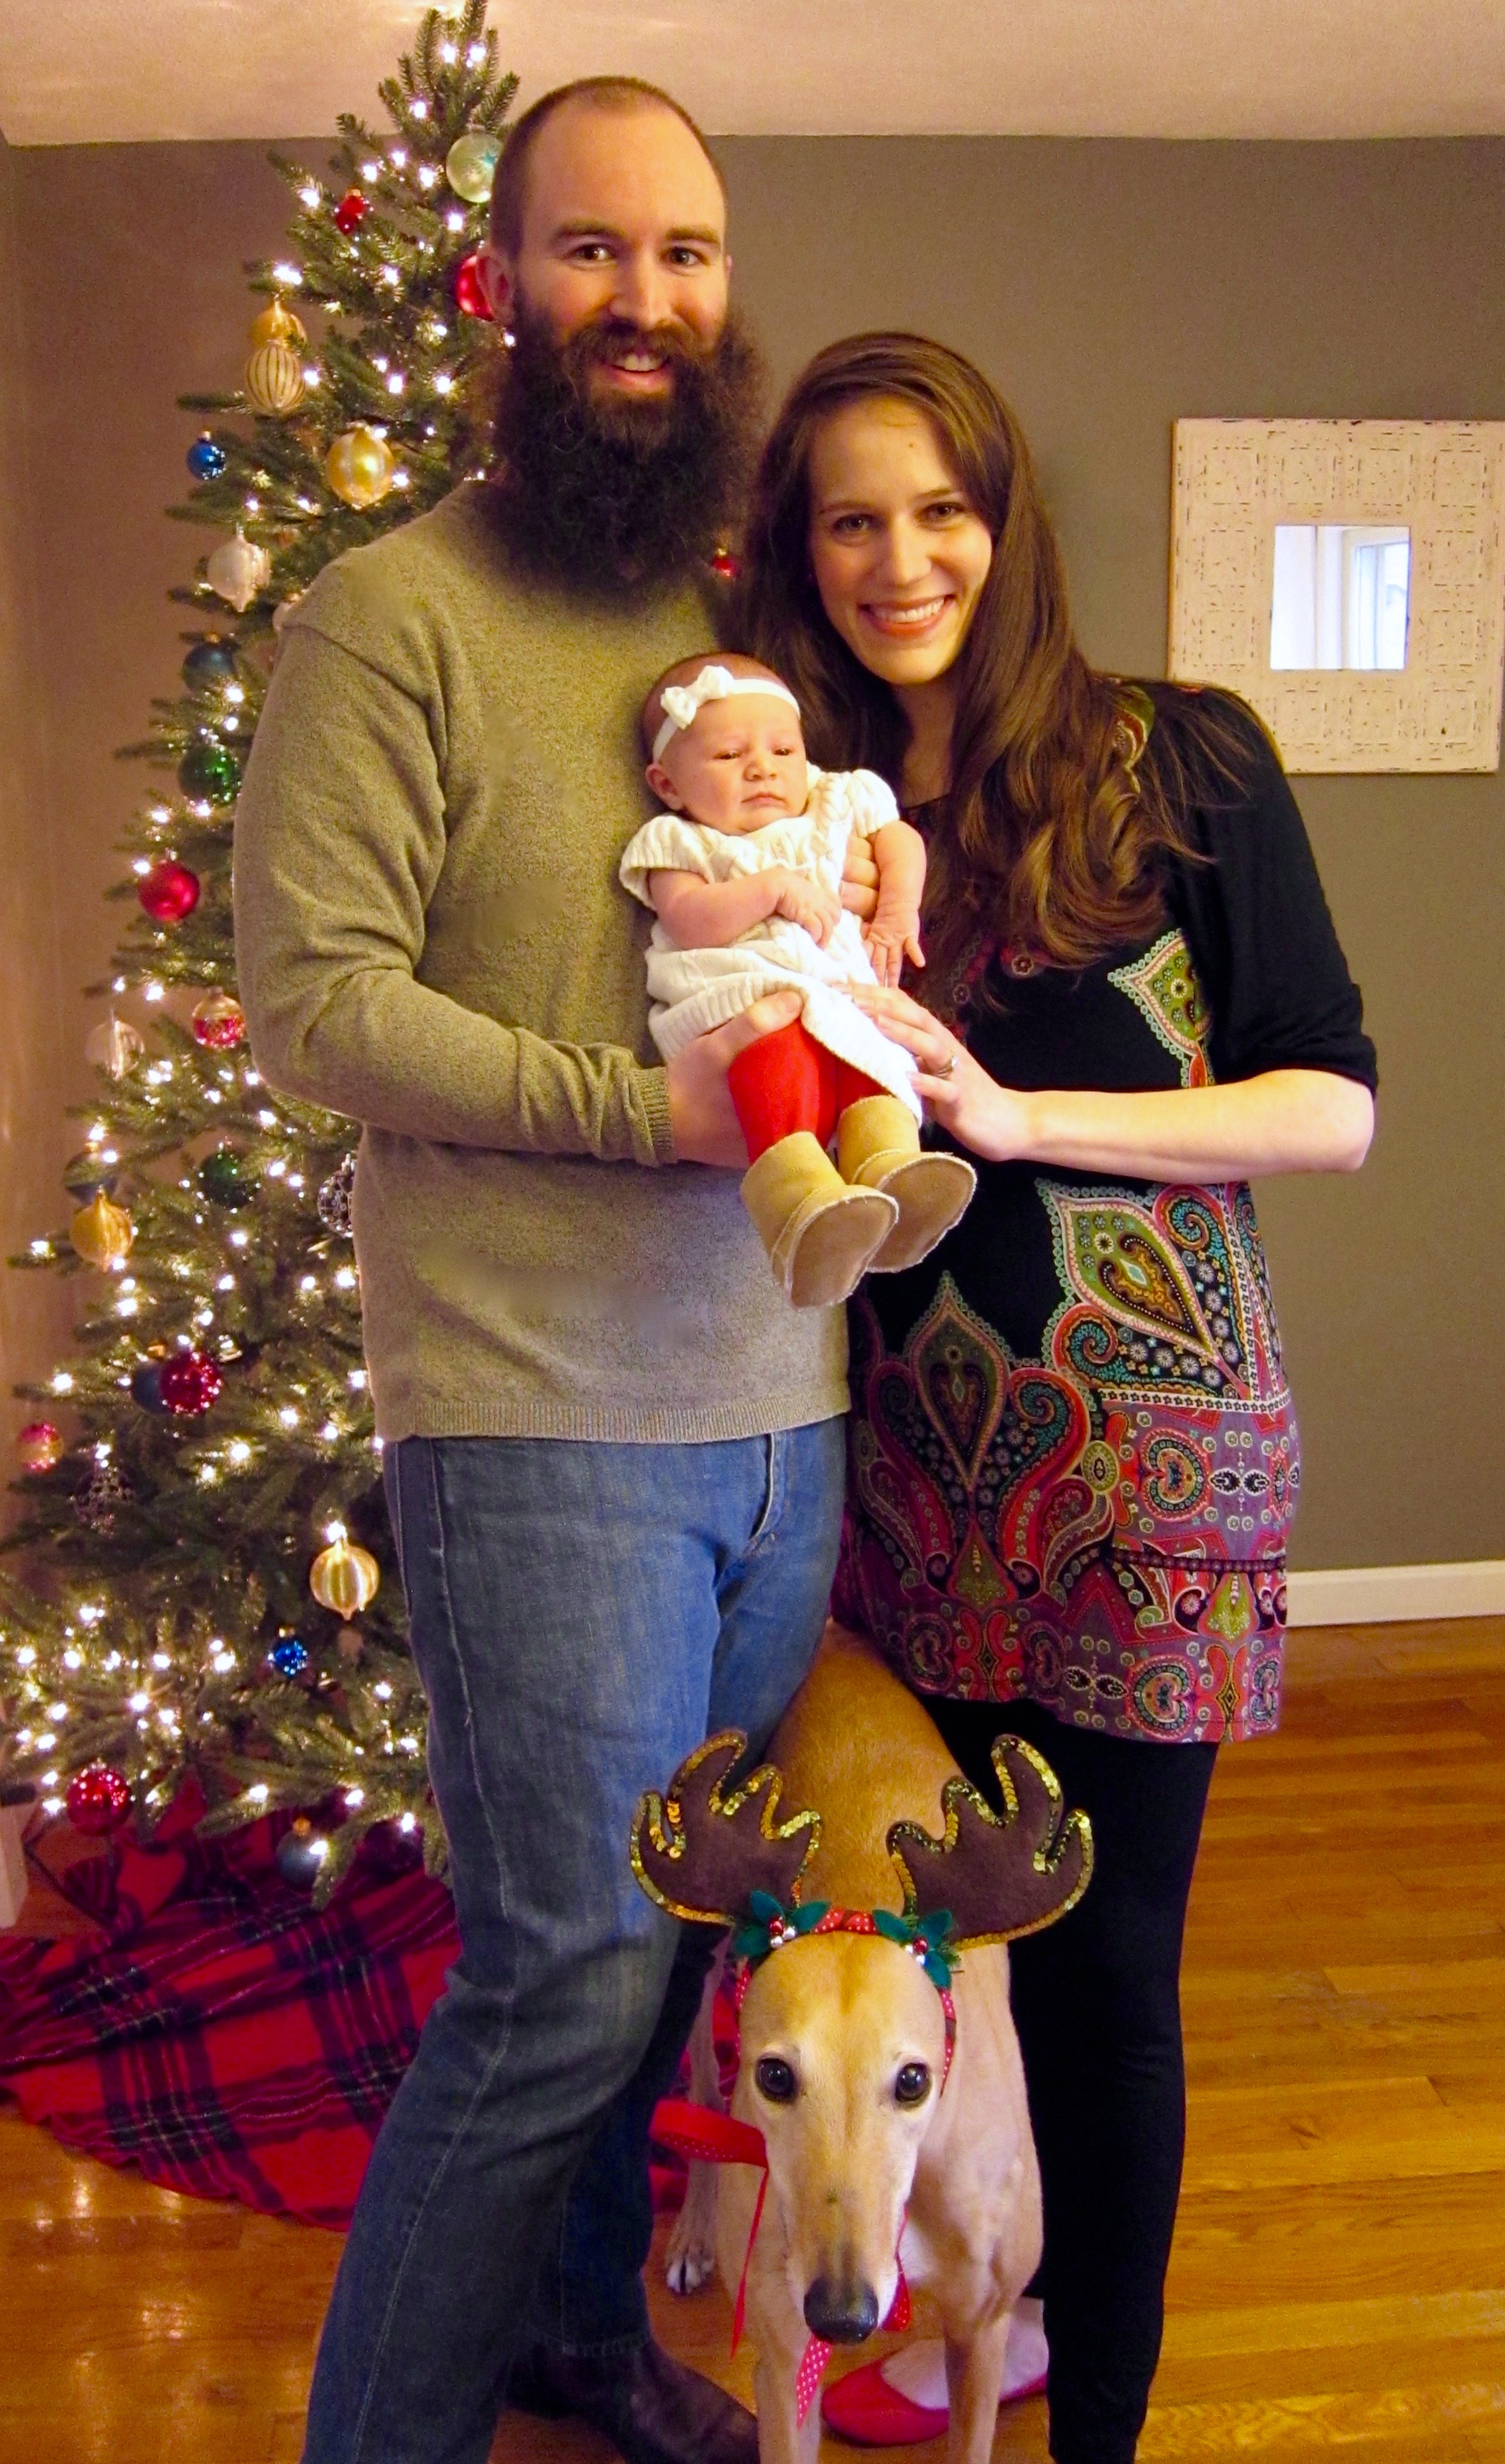 Our Christmas card/birth announcement photo. This was the only shot where Babywoods wasn't crying and Frugal Hound was facing forward.